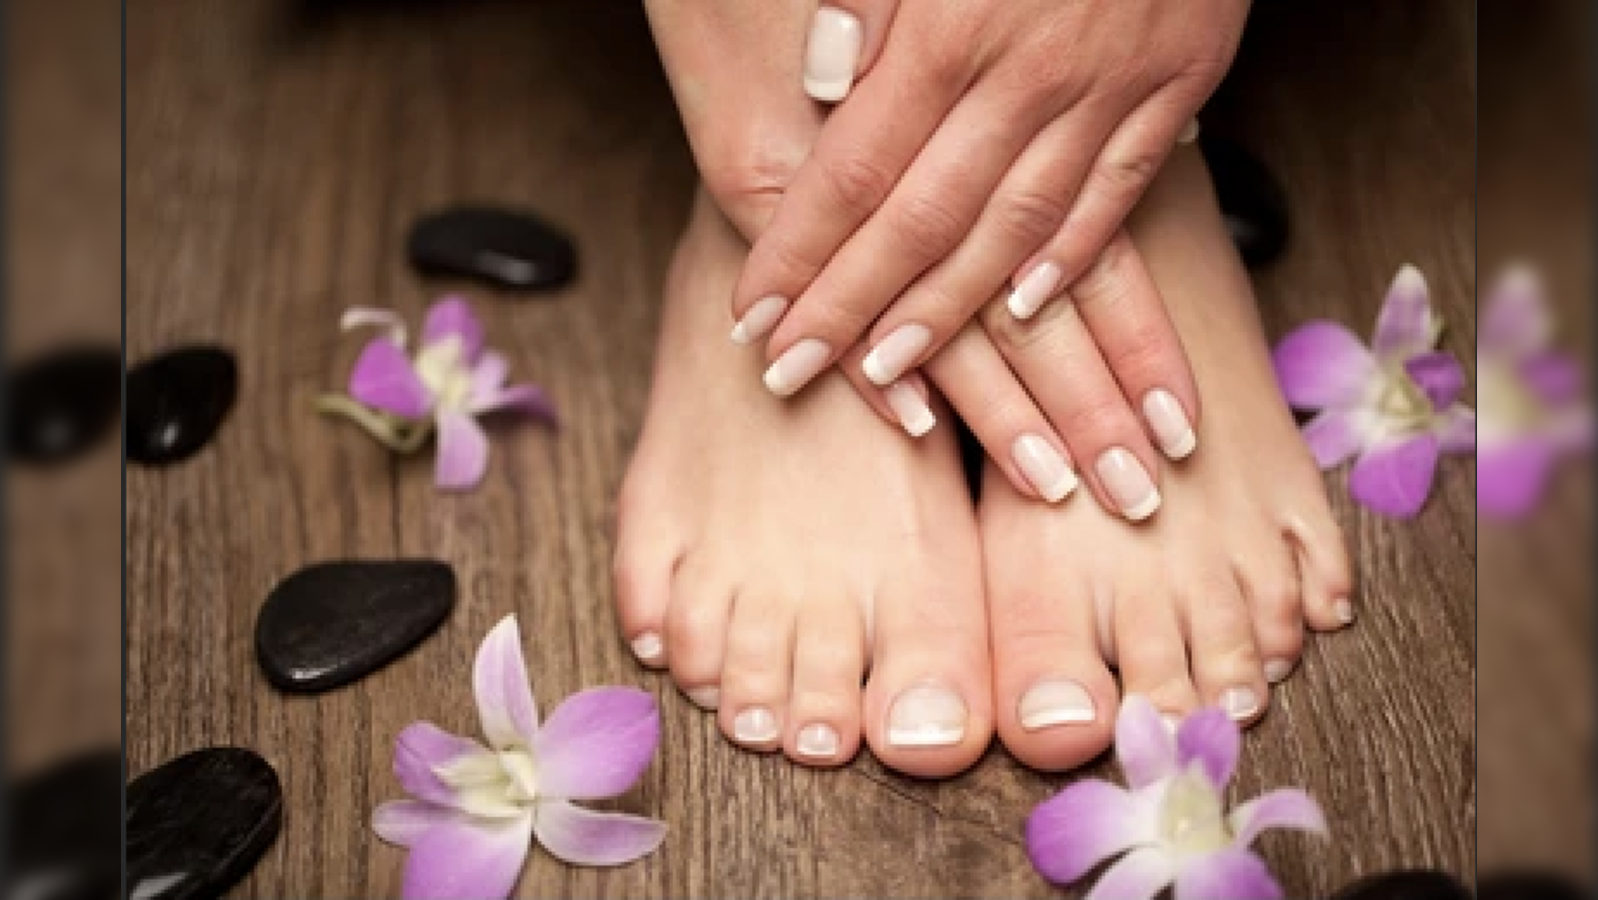 the BEST Pedicure Products for Soft Smooth Feet